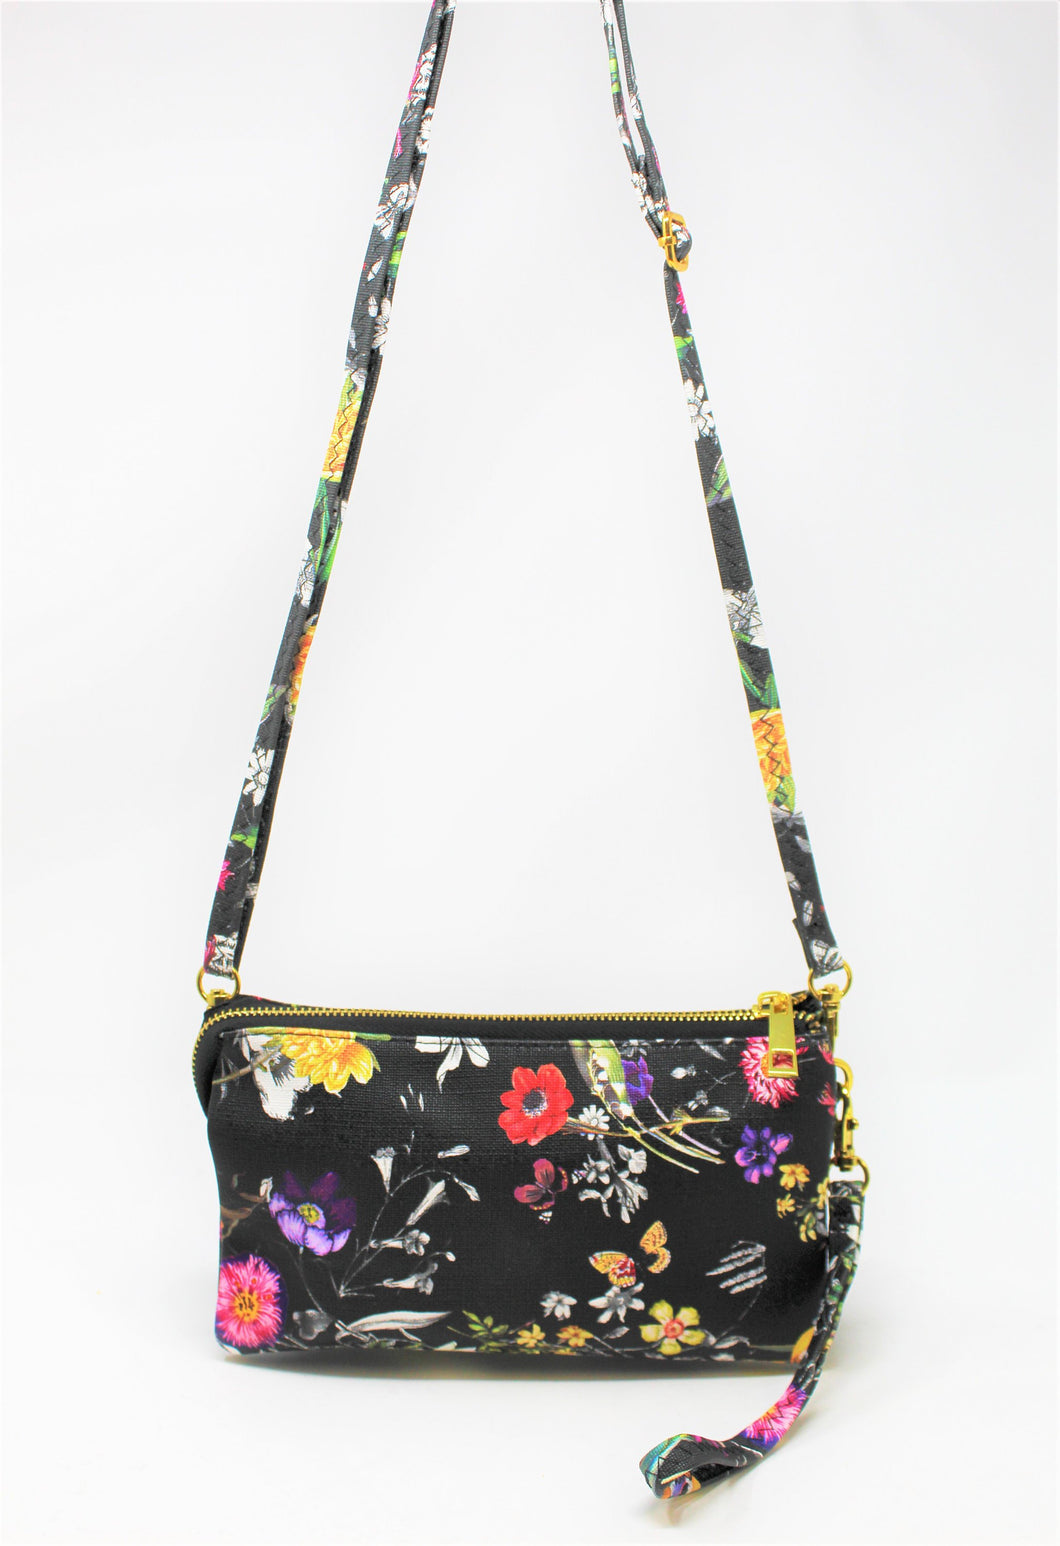 Black Printed Wrist-let bag | Long straps | Compact | Trendy/Stylish Collection